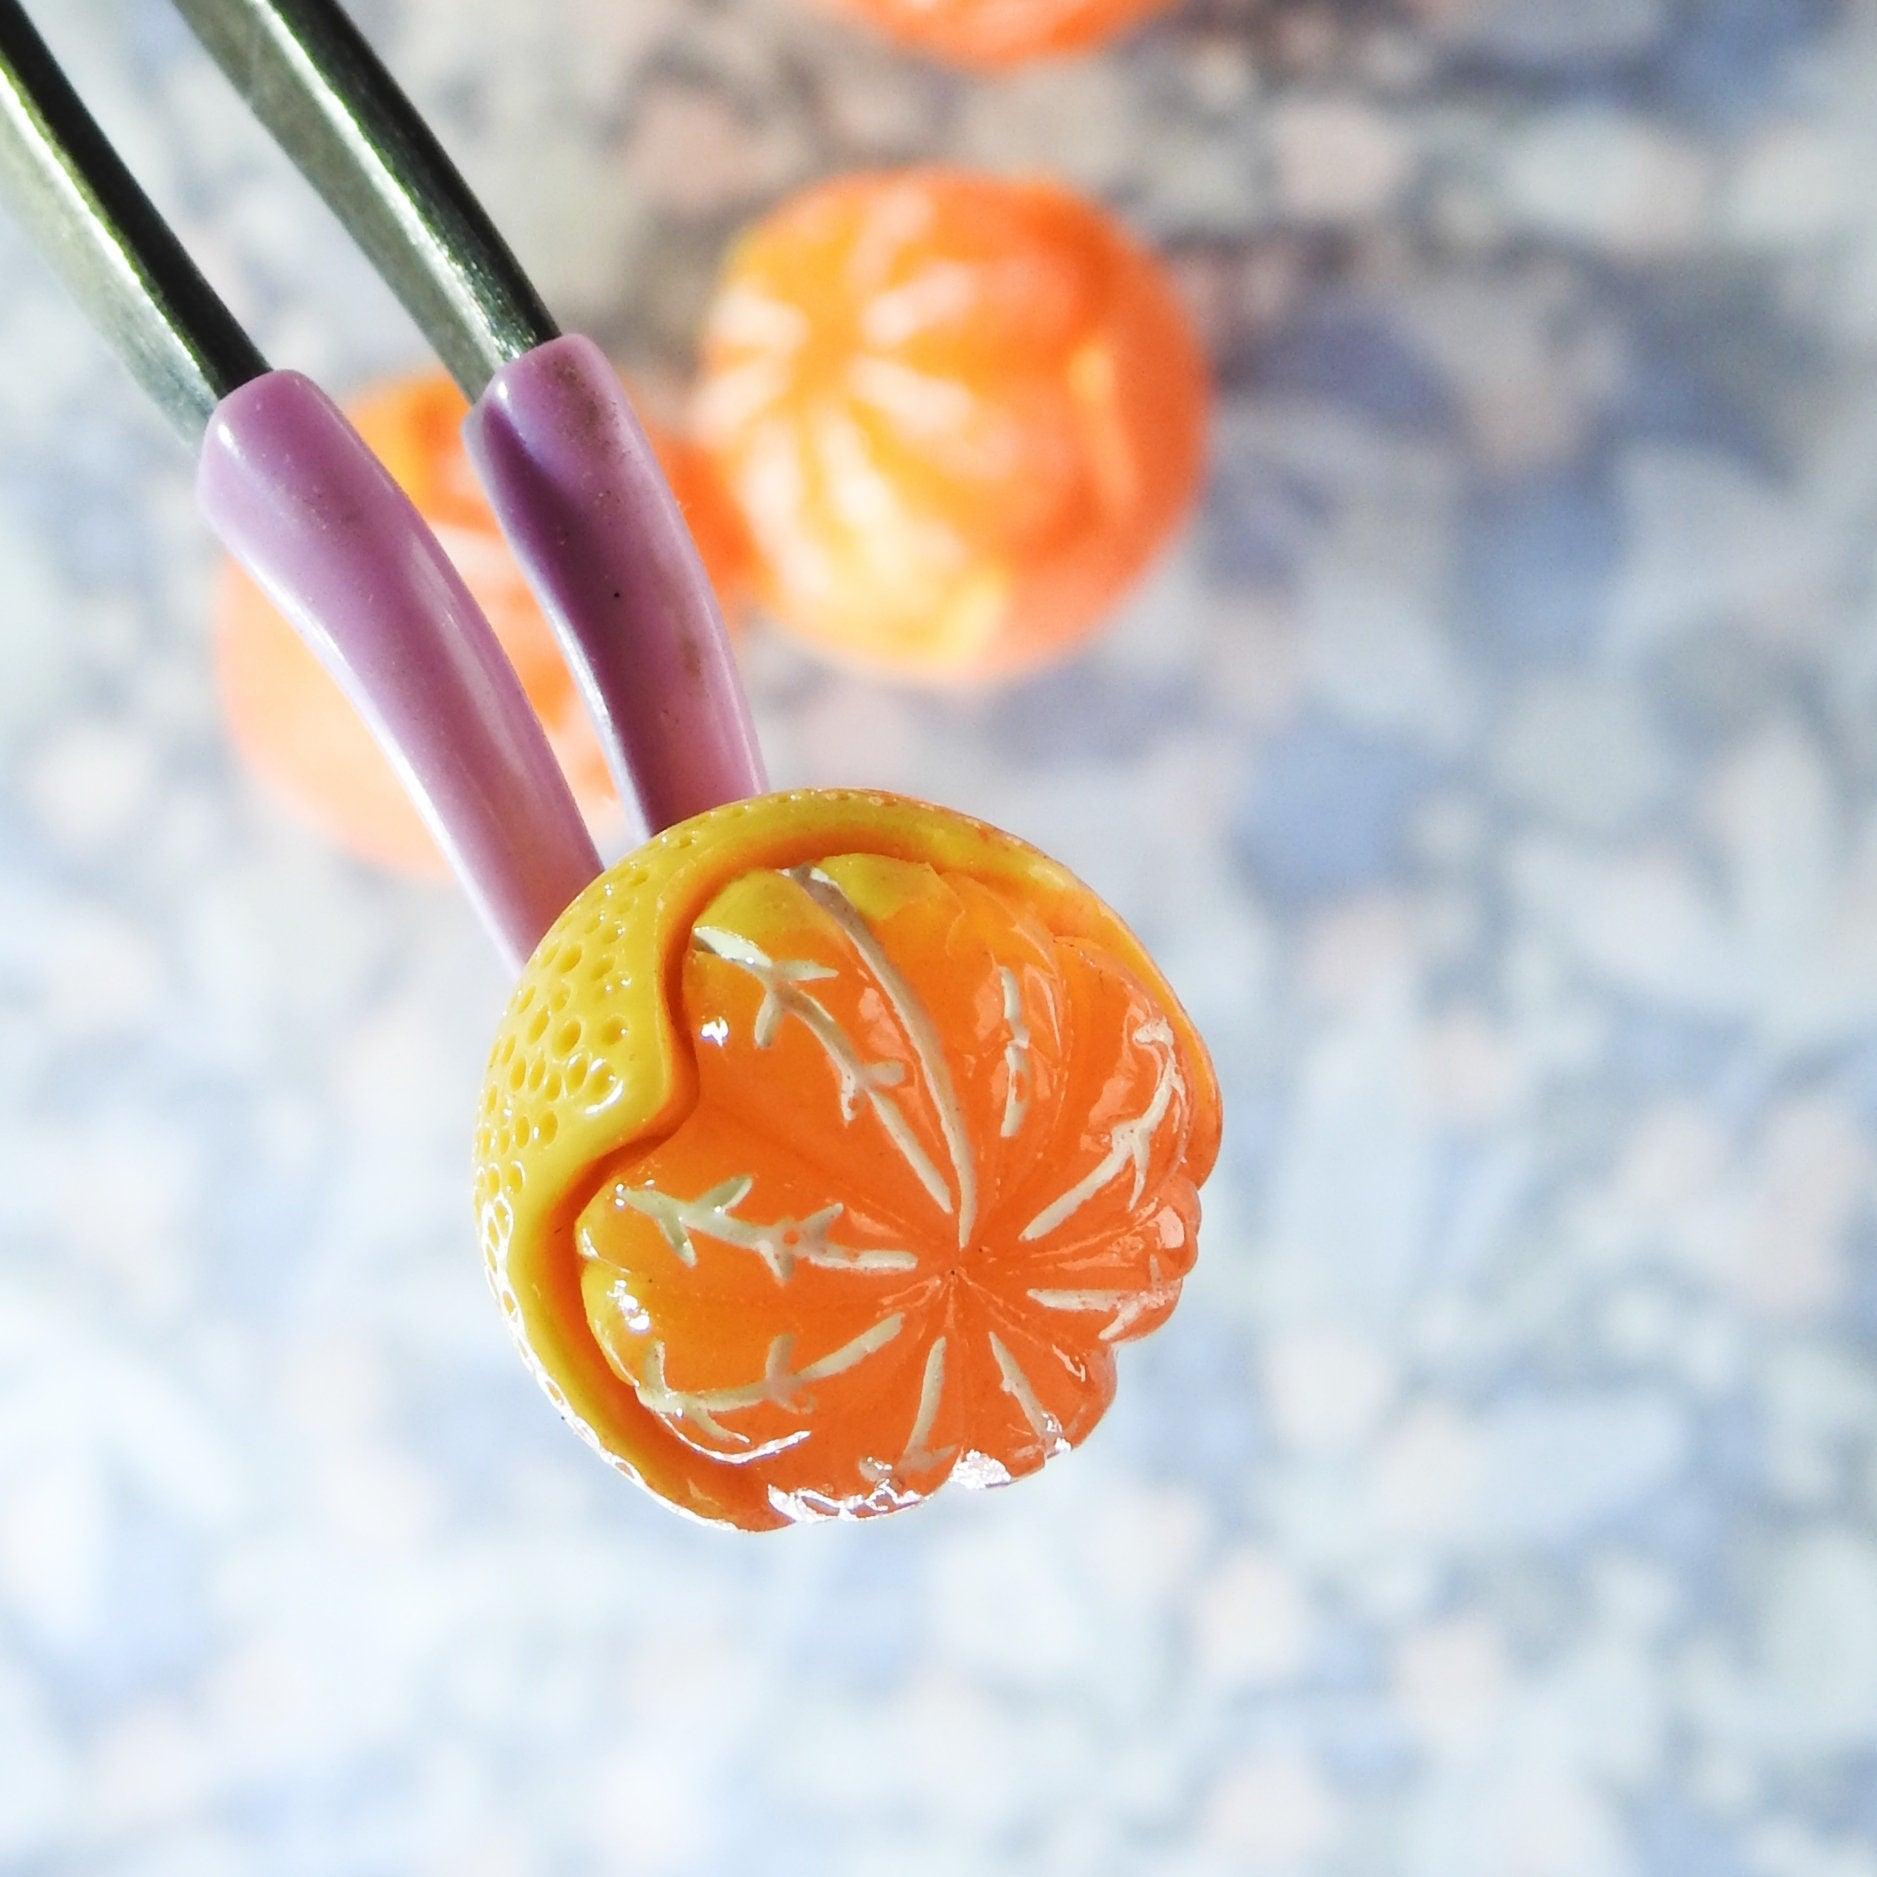 5 Fruit orange shaped buttons with a shank for sewing, making colorful charm bracelet jewelry, colored DIY or cute fun crafts for teenagers